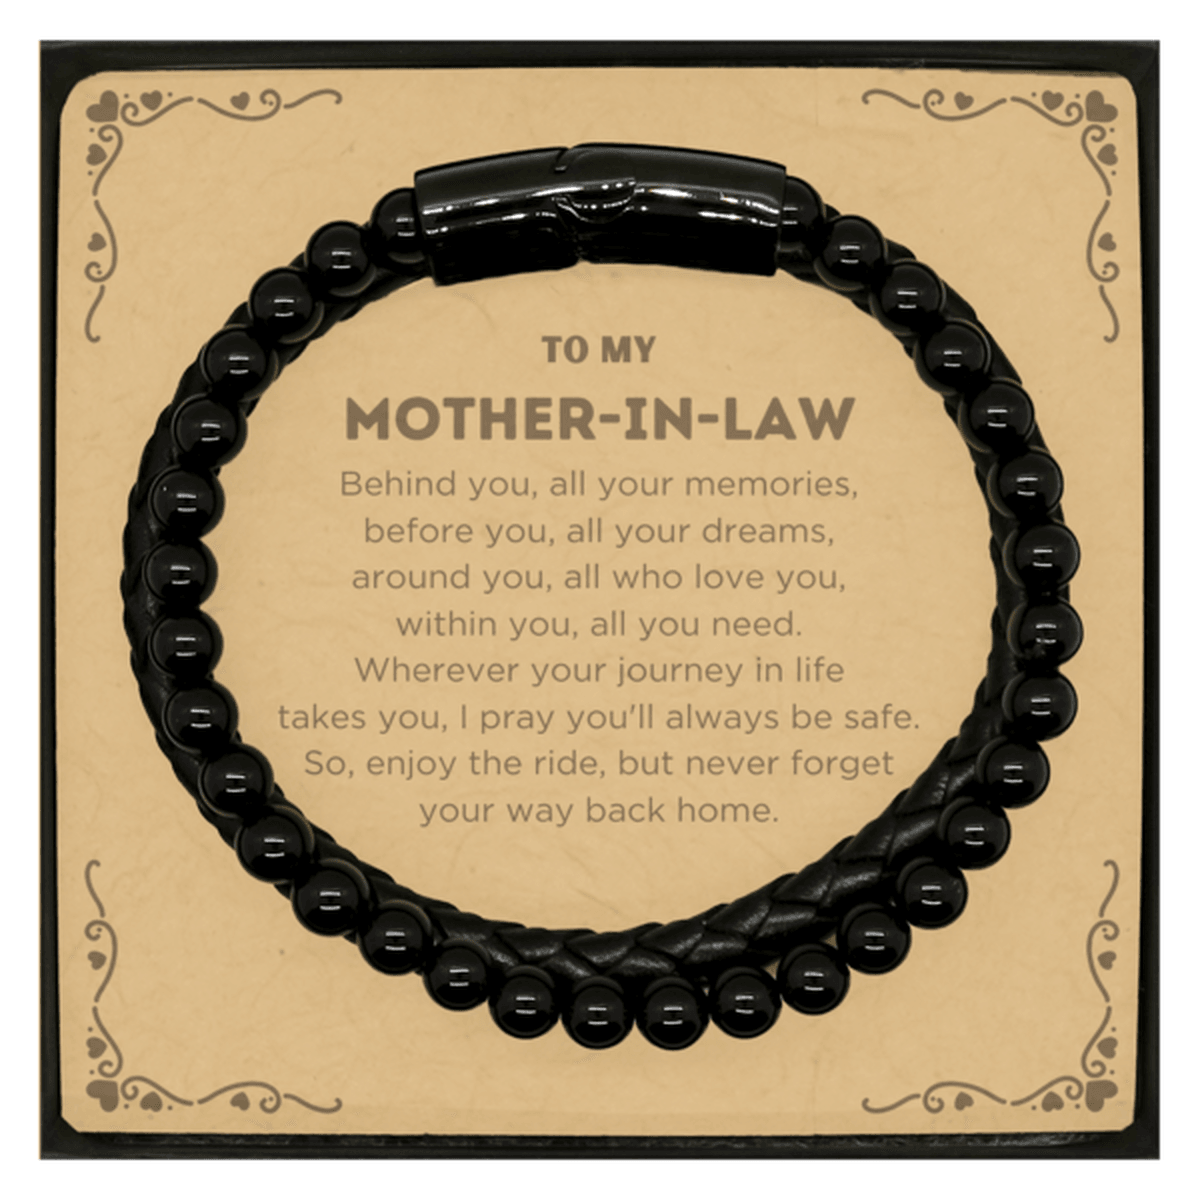 To My Mother-In-Law Gifts, Inspirational Mother-In-Law Stone Leather Bracelets, Sentimental Birthday Christmas Unique Gifts For Mother-In-Law Behind you, all your memories, before you, all your dreams, around you, all who love you, within you, all you nee - Mallard Moon Gift Shop